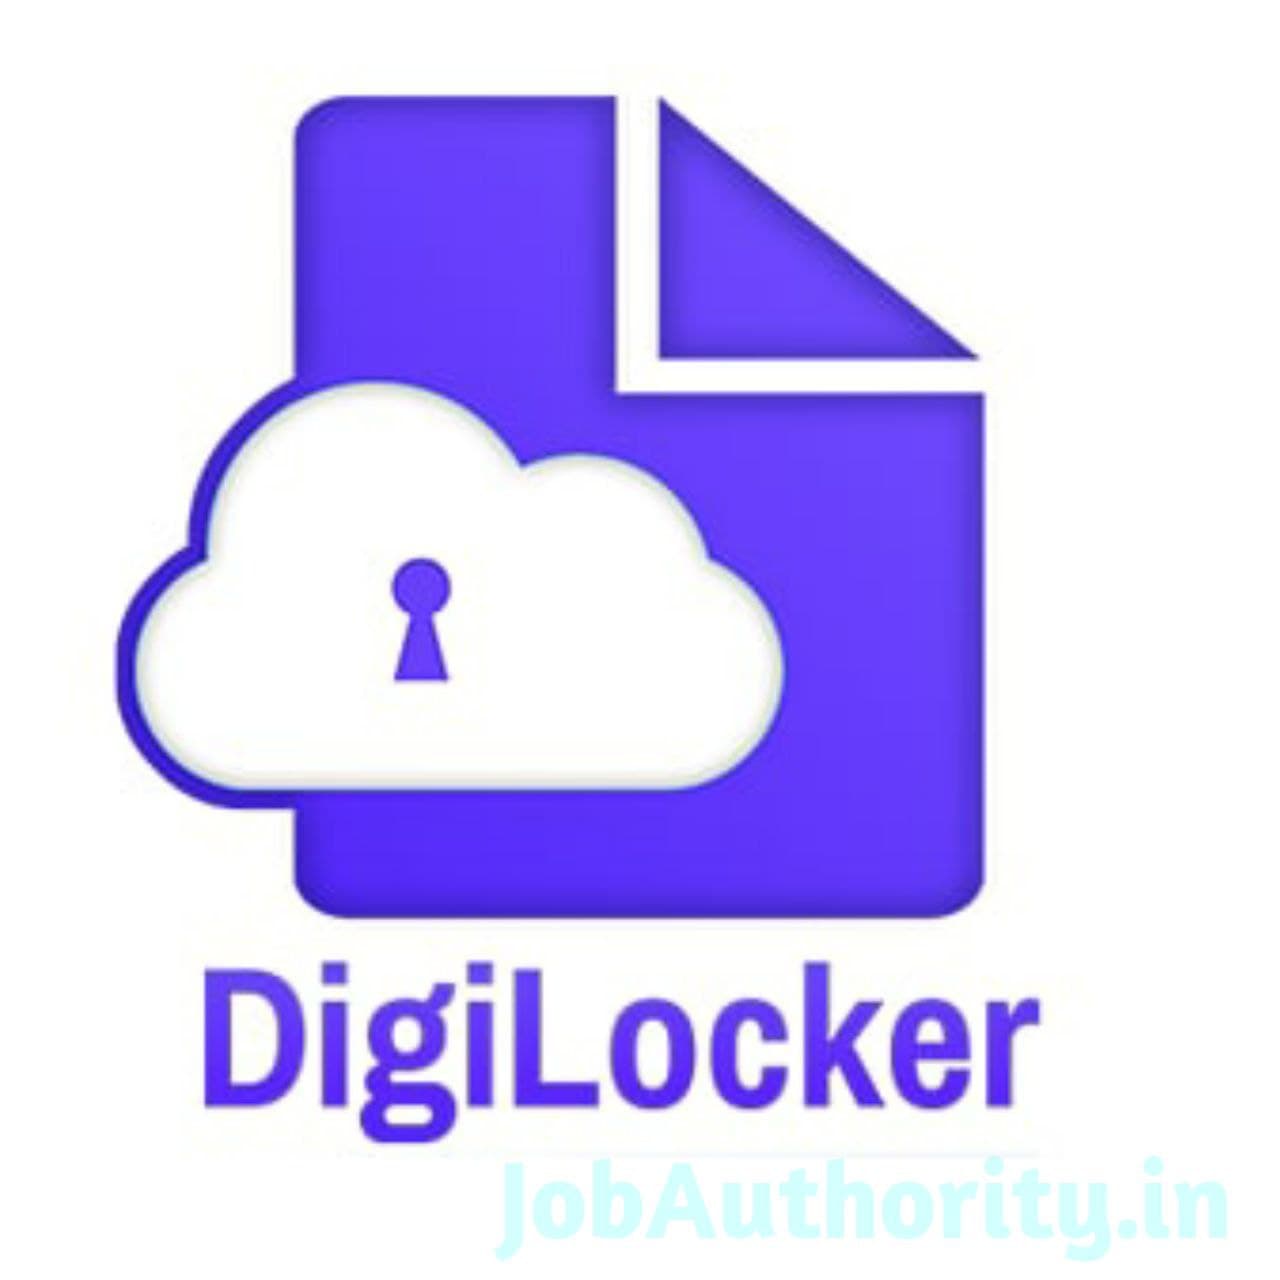 DigiLocker - A Simple & Secure Wallet For Your Document